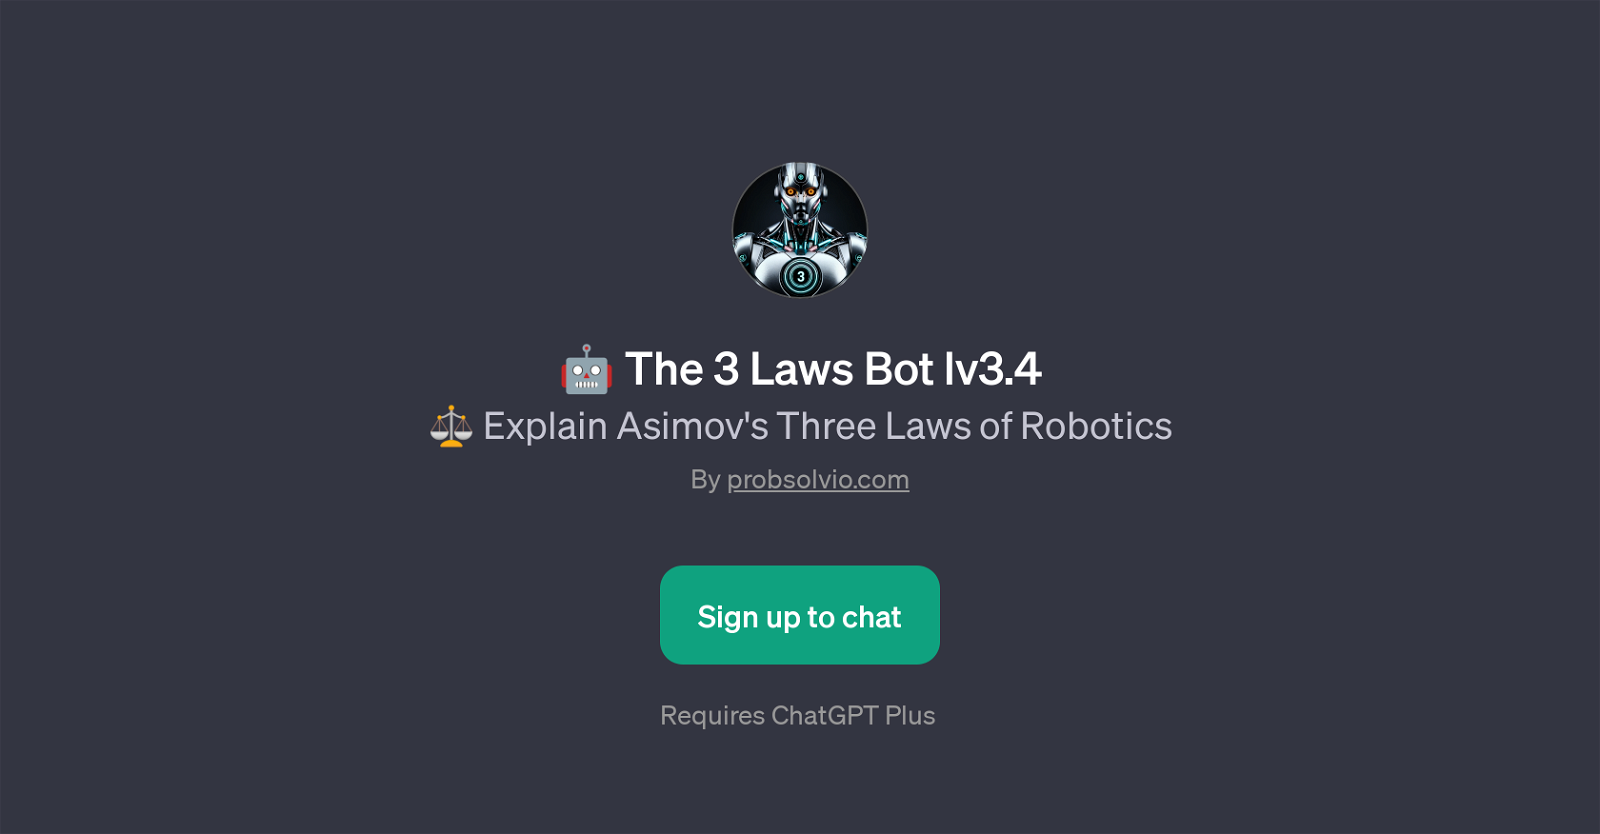 The 3 Laws Bot lv3.4 website